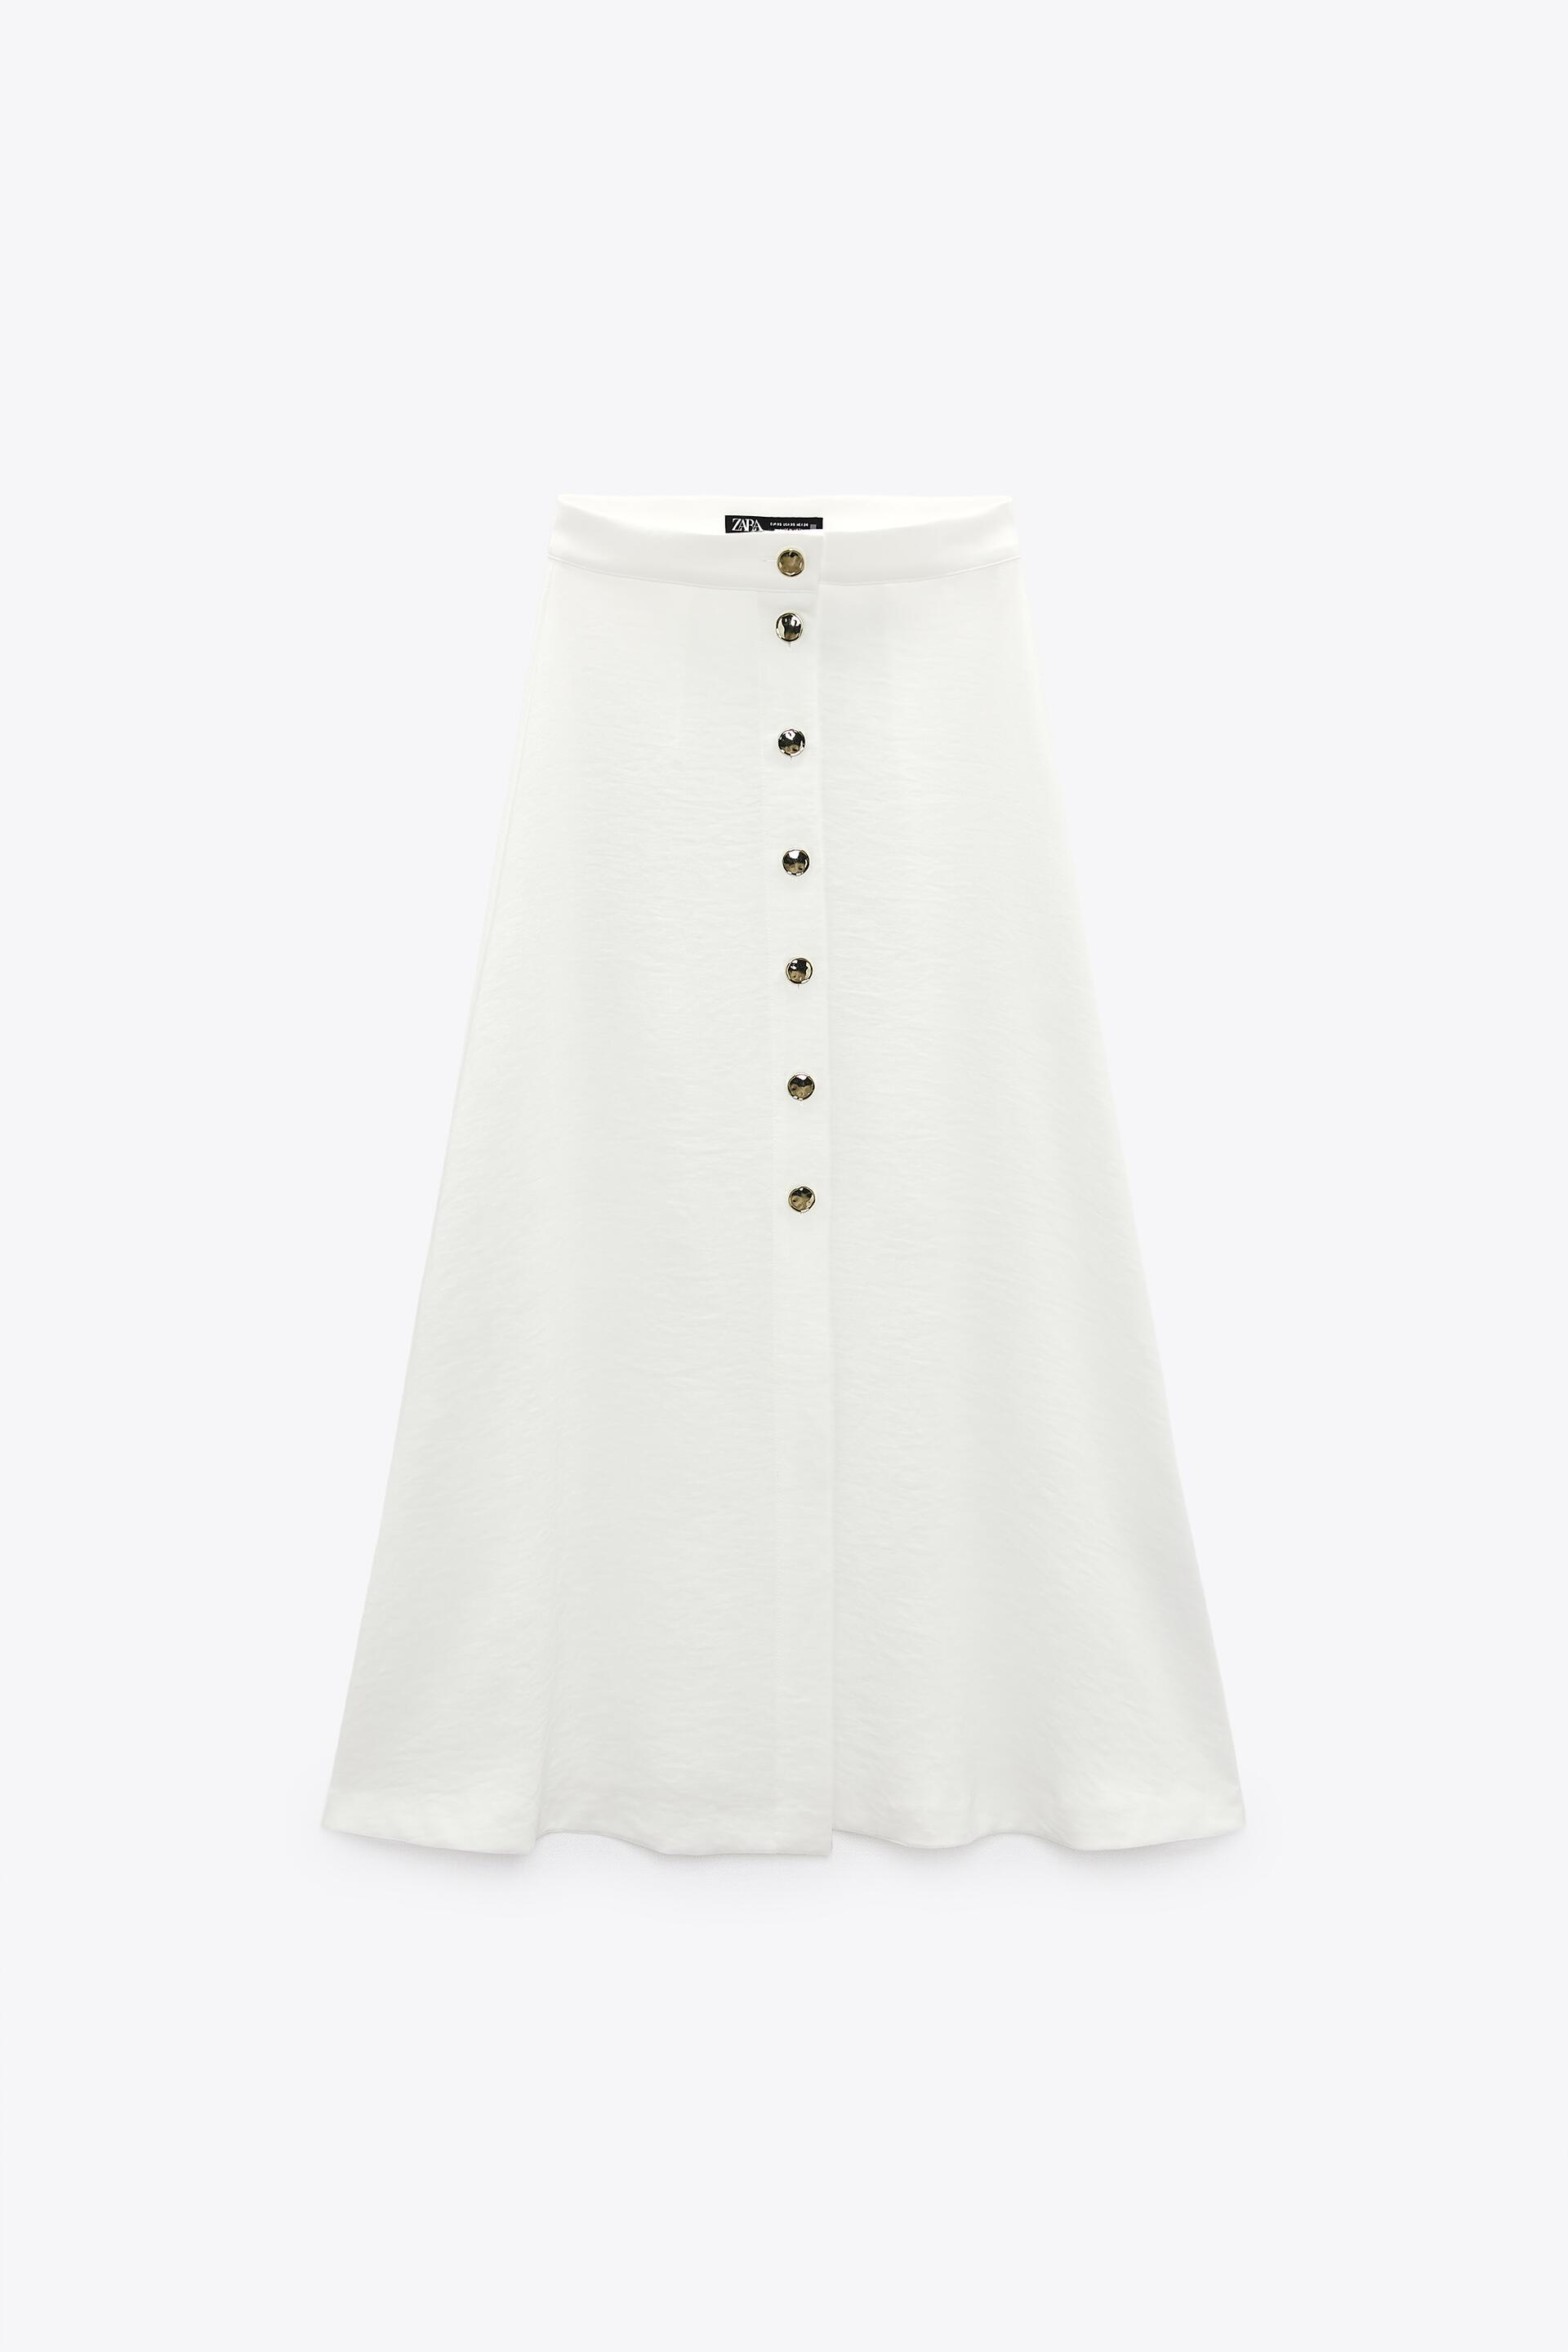 ZARA Crepe Skirt With Front Gold Buttons